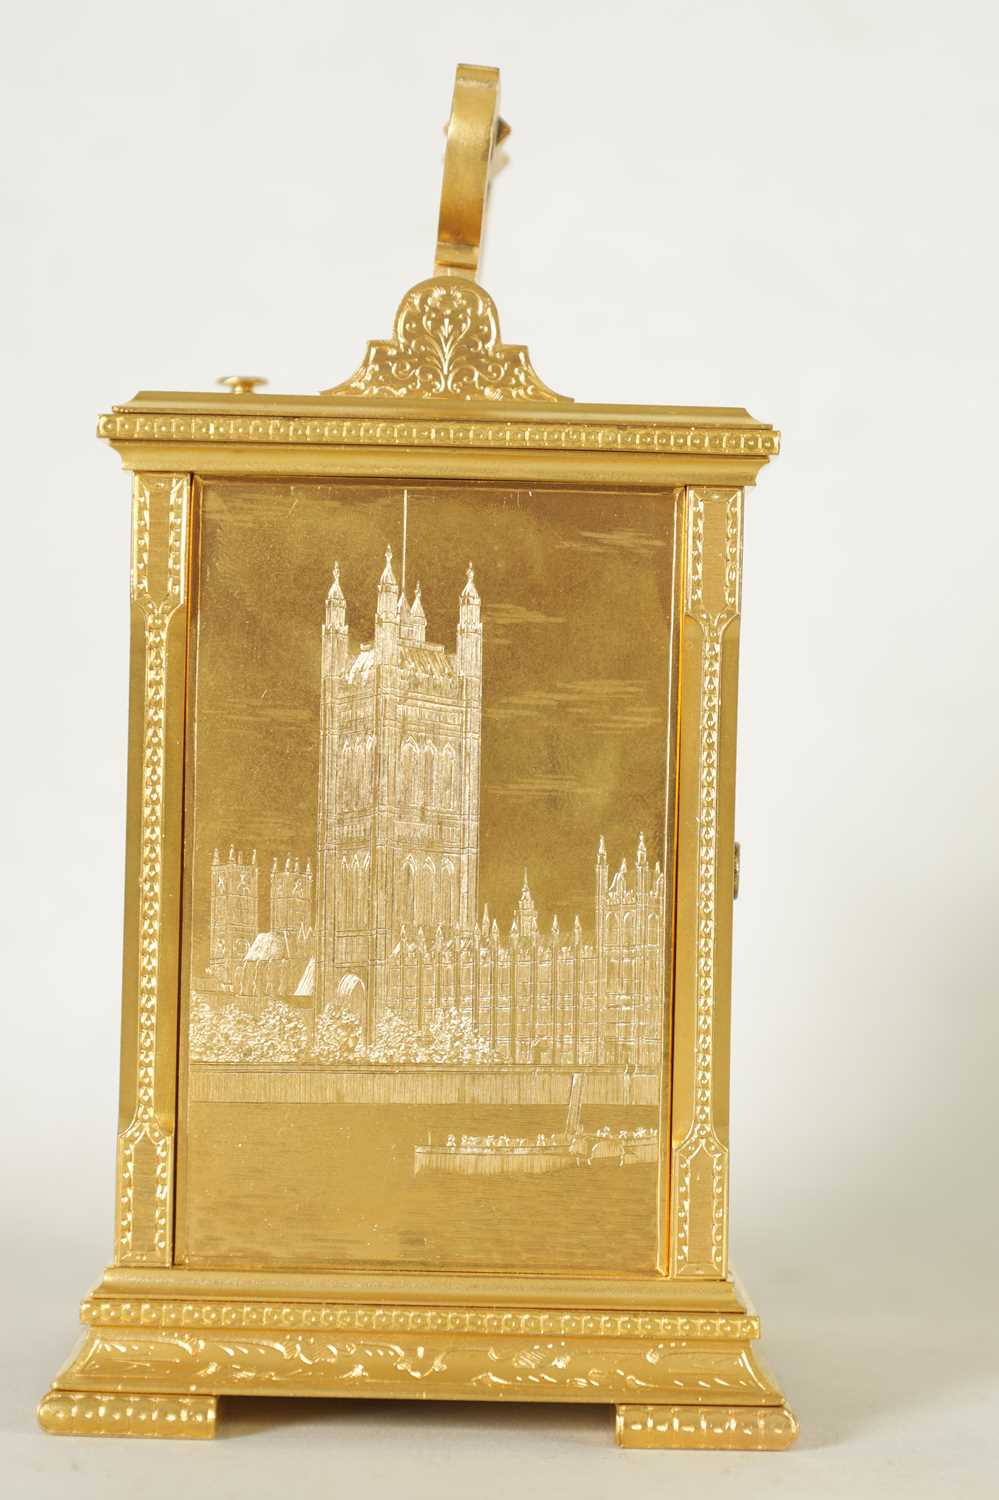 A FINELY ENGRAVED ENGLISH CASED REPEATING CARRIAGE CLOCK - Image 5 of 8